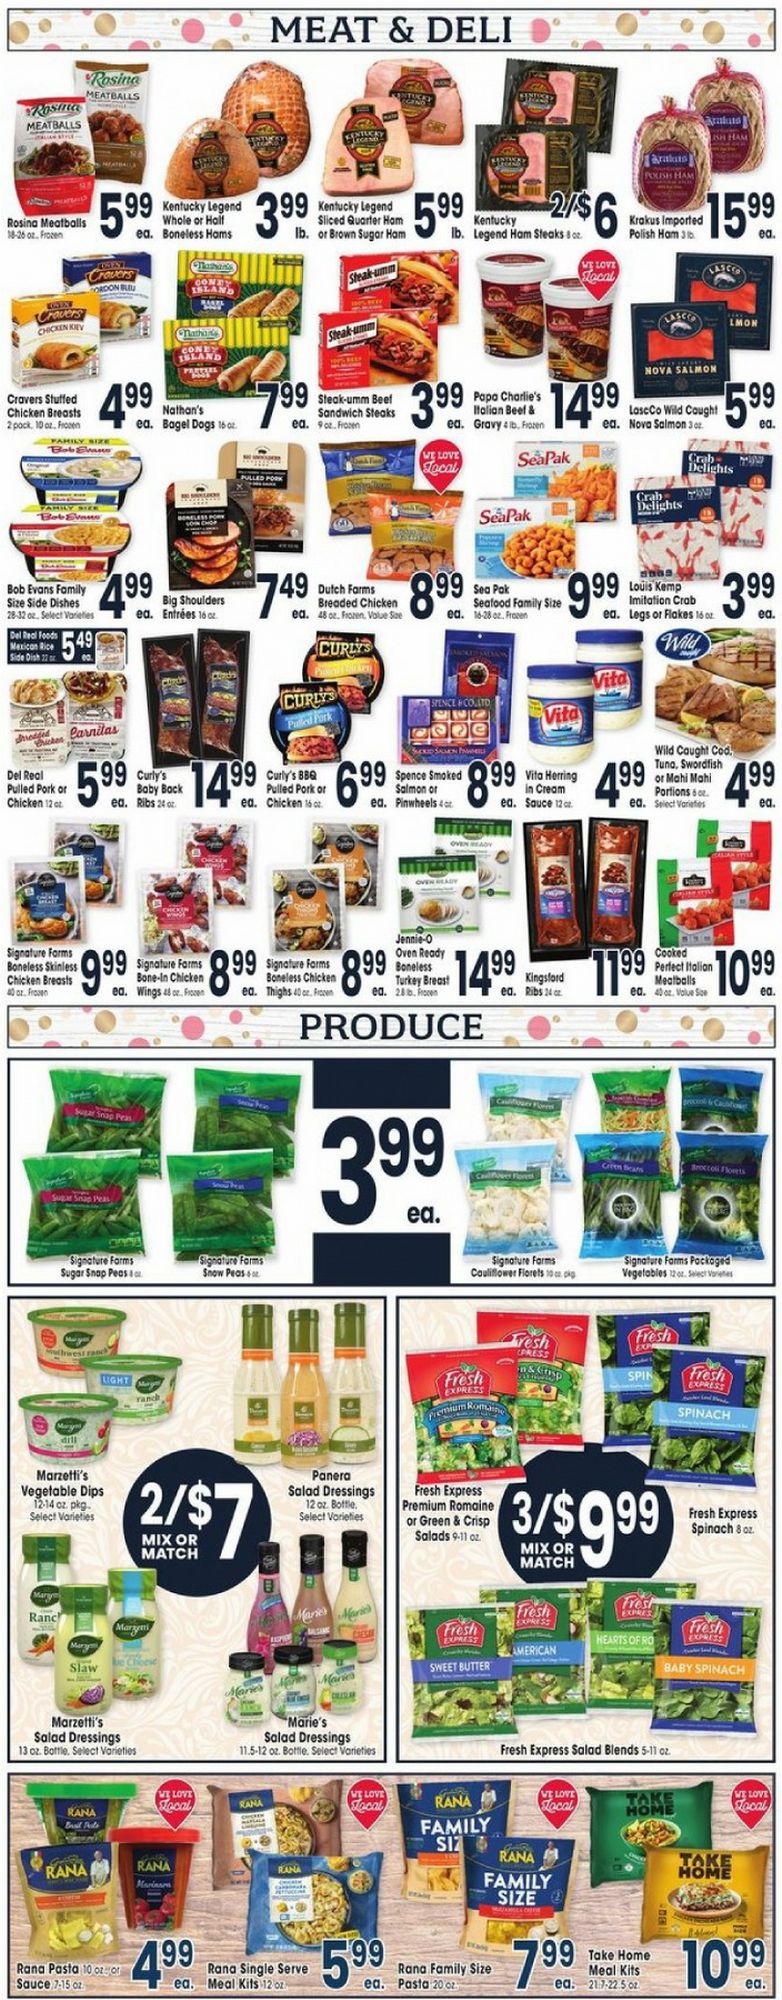 Jewel Osco Christmas July 2024 Weekly Sales, Deals, Discounts and Digital Coupons.